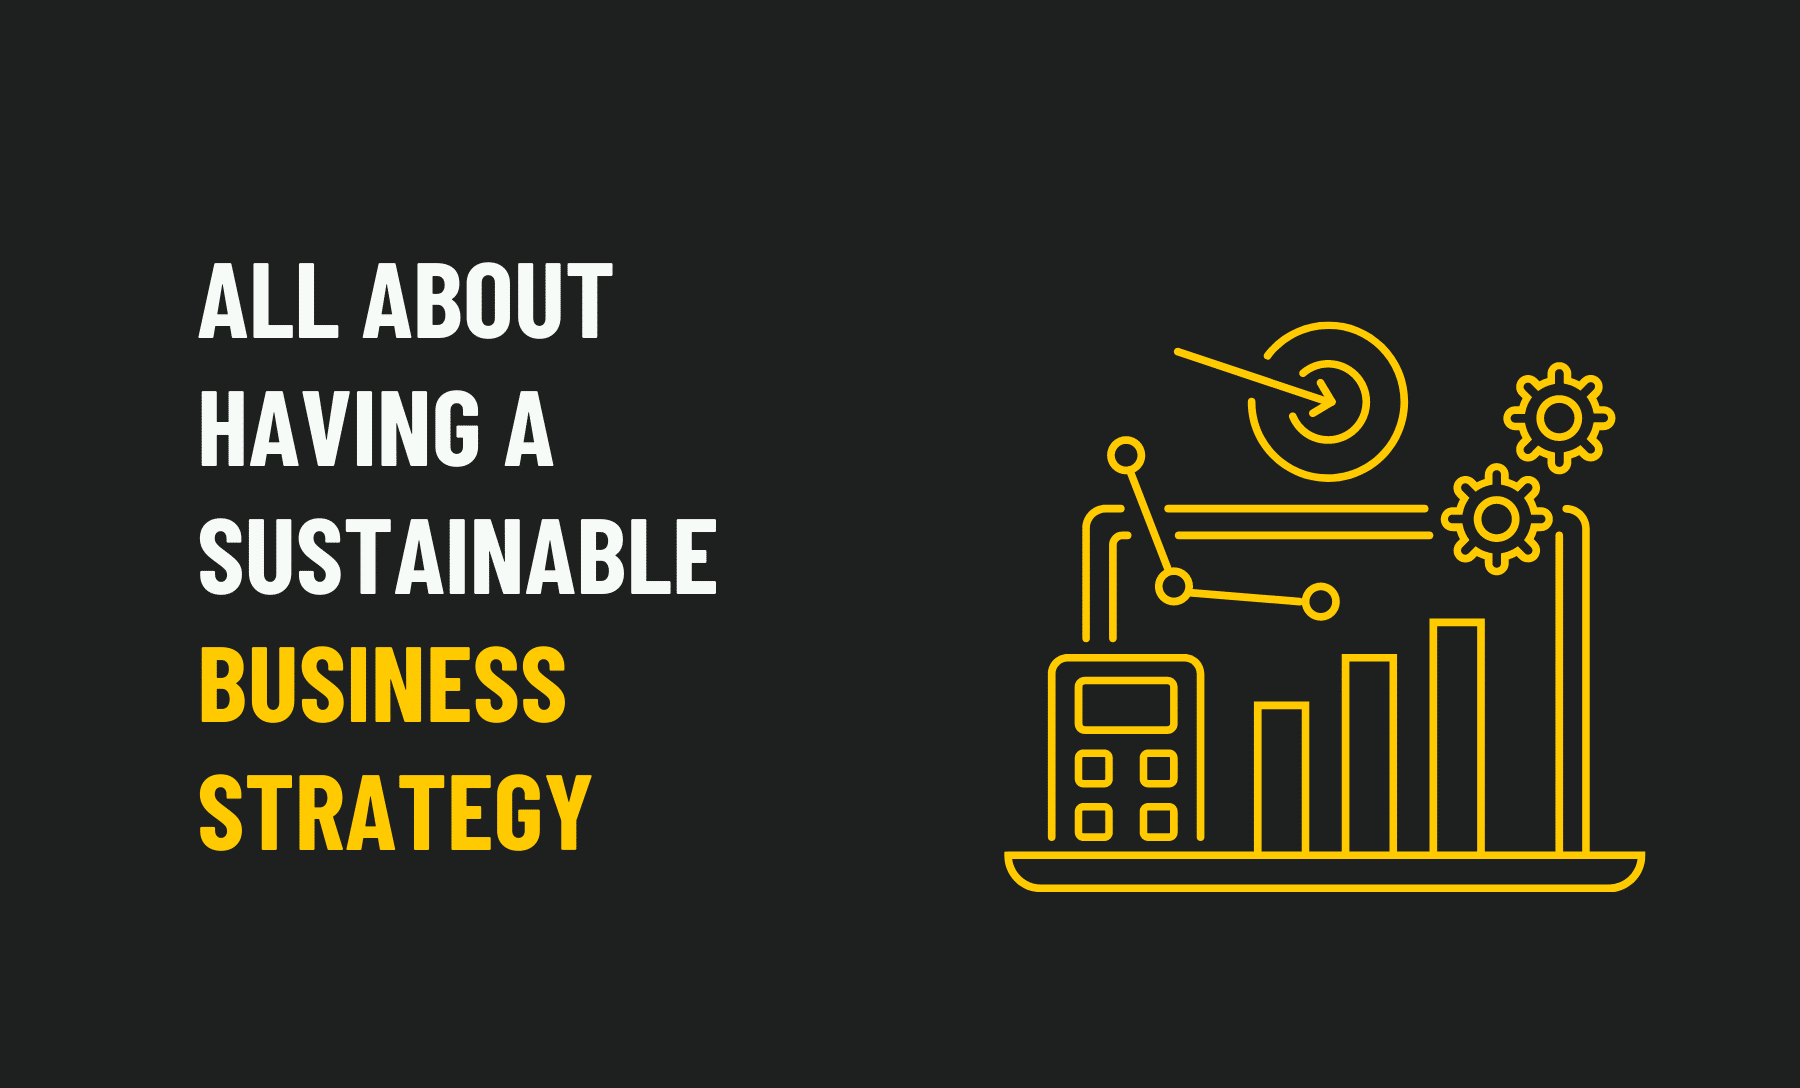 All About Having a Sustainable Business Strategy